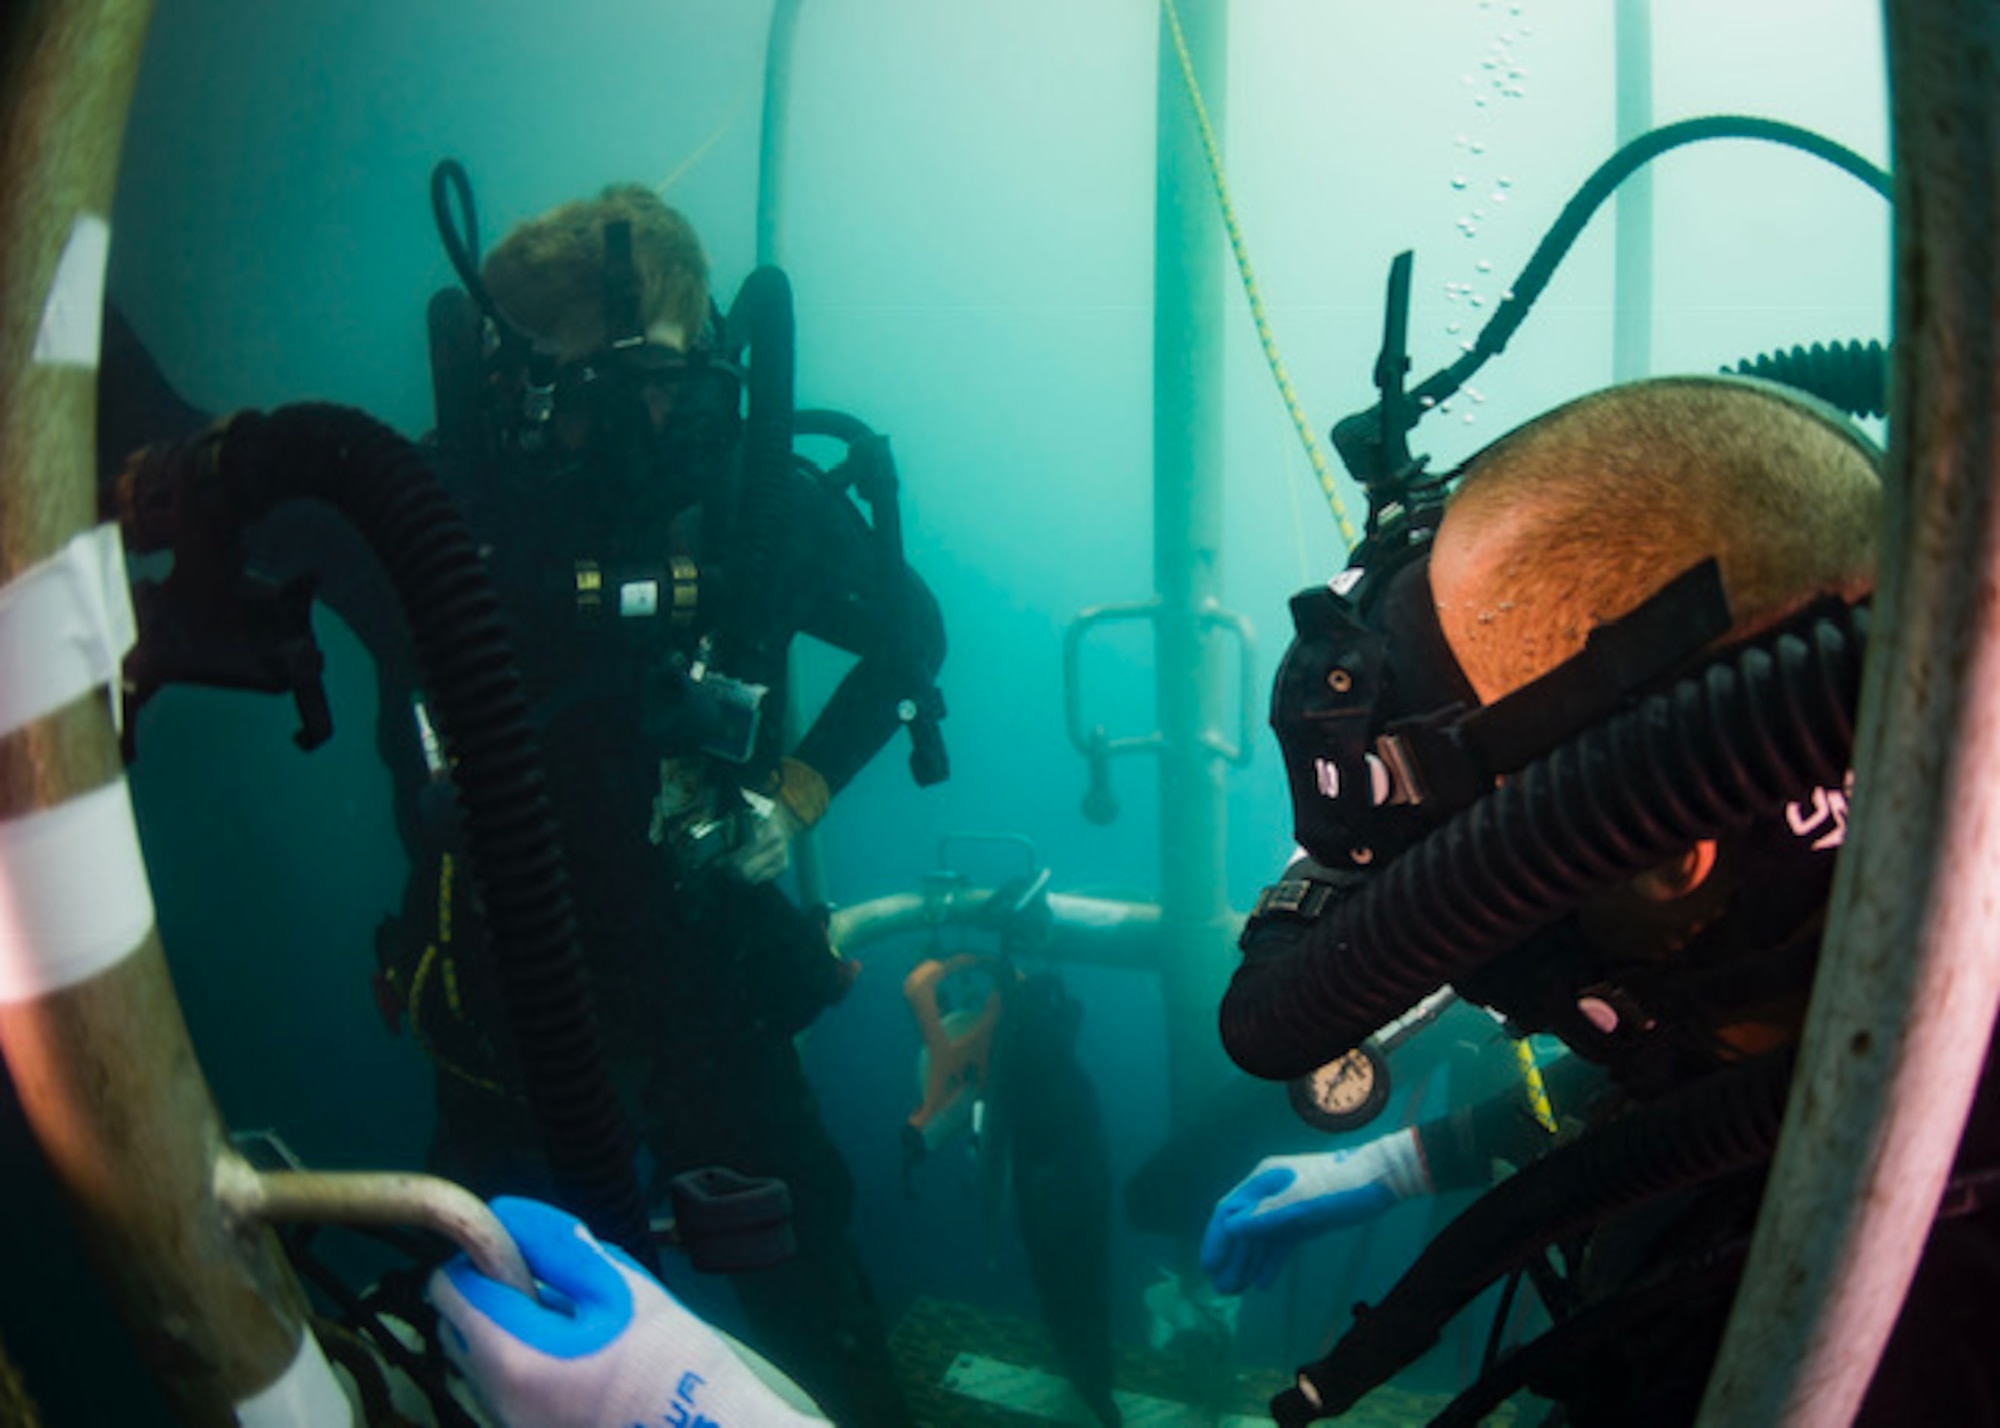 U.S. Navy Divers assigned to Mobile Diving and Salvage Company ONE-EIGHT embarked aboard USNS Salvor (T-ARS 52), wait on a diving stage during a two-hour decompression stop after diving to 240 feet off the coast of Madang, Papua New Guinea, Dec. 7, 2018.